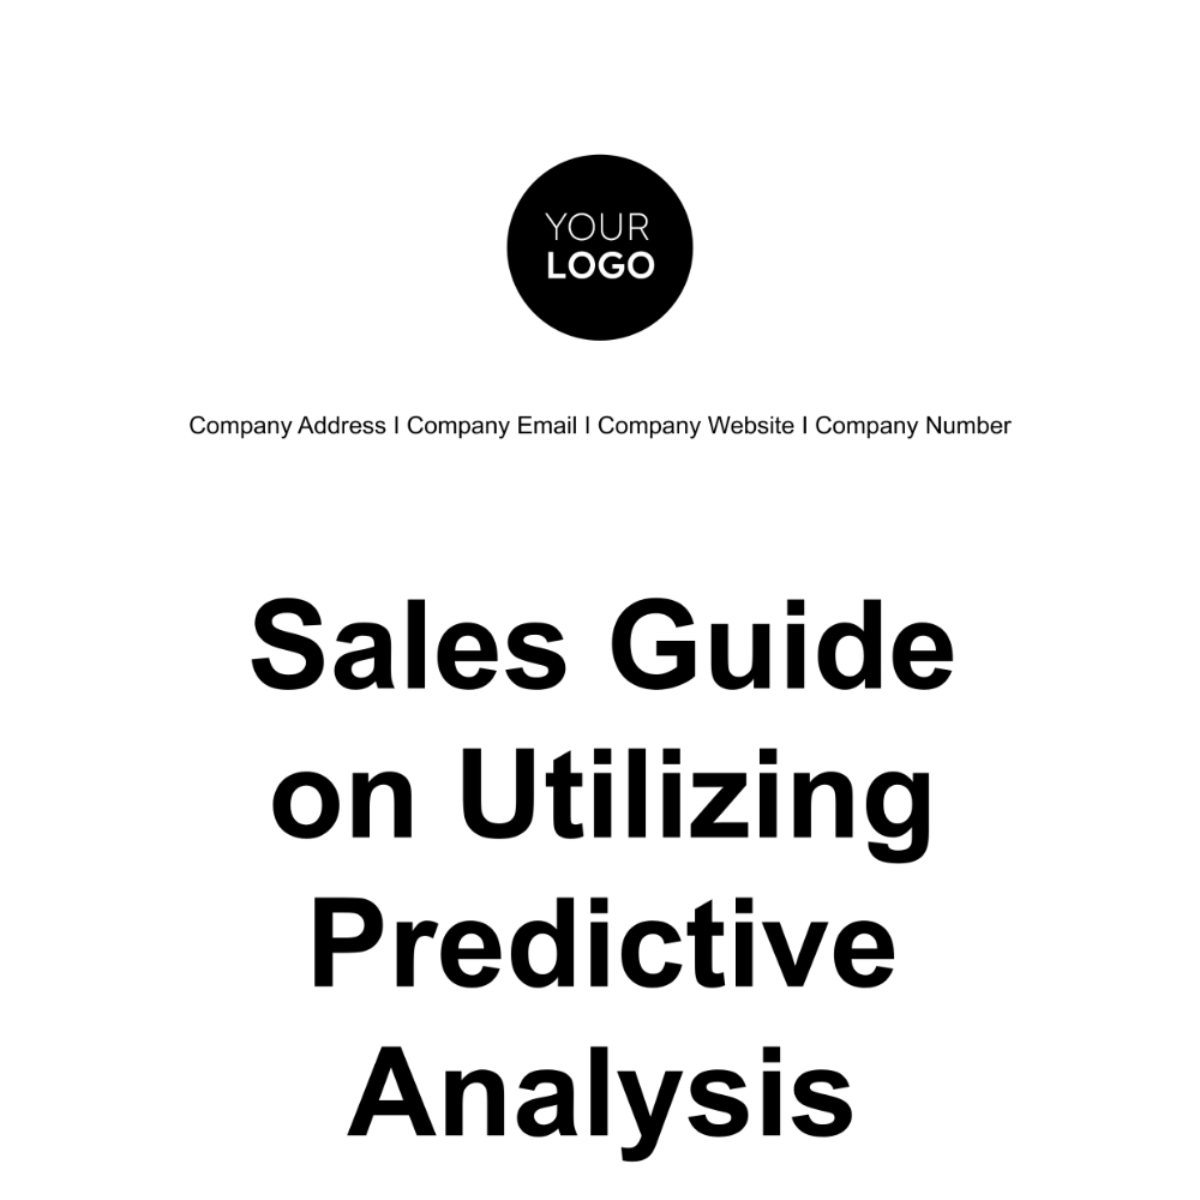 Sales Guide on Utilizing Predictive Analysis Template